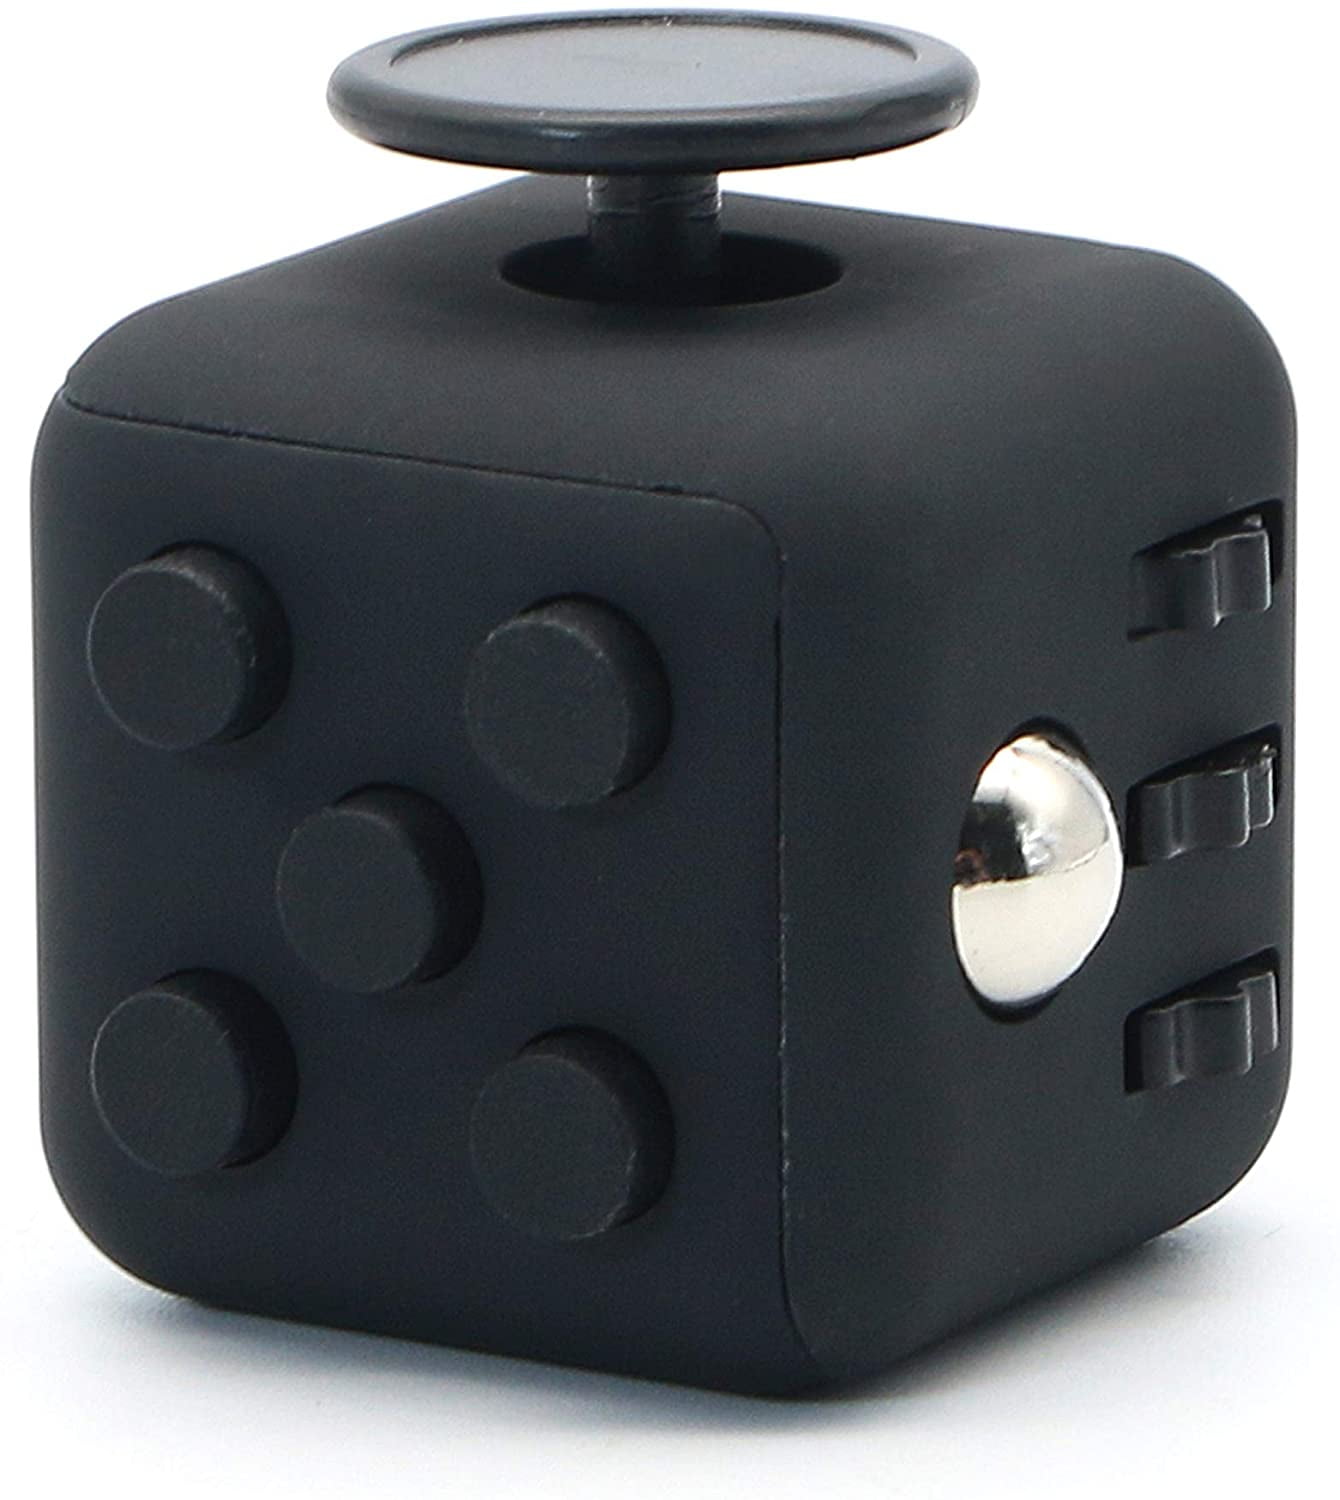 Magic Fidget Cube Anxiety Stress Relief Focus 6-side Gifts for Adults Children 